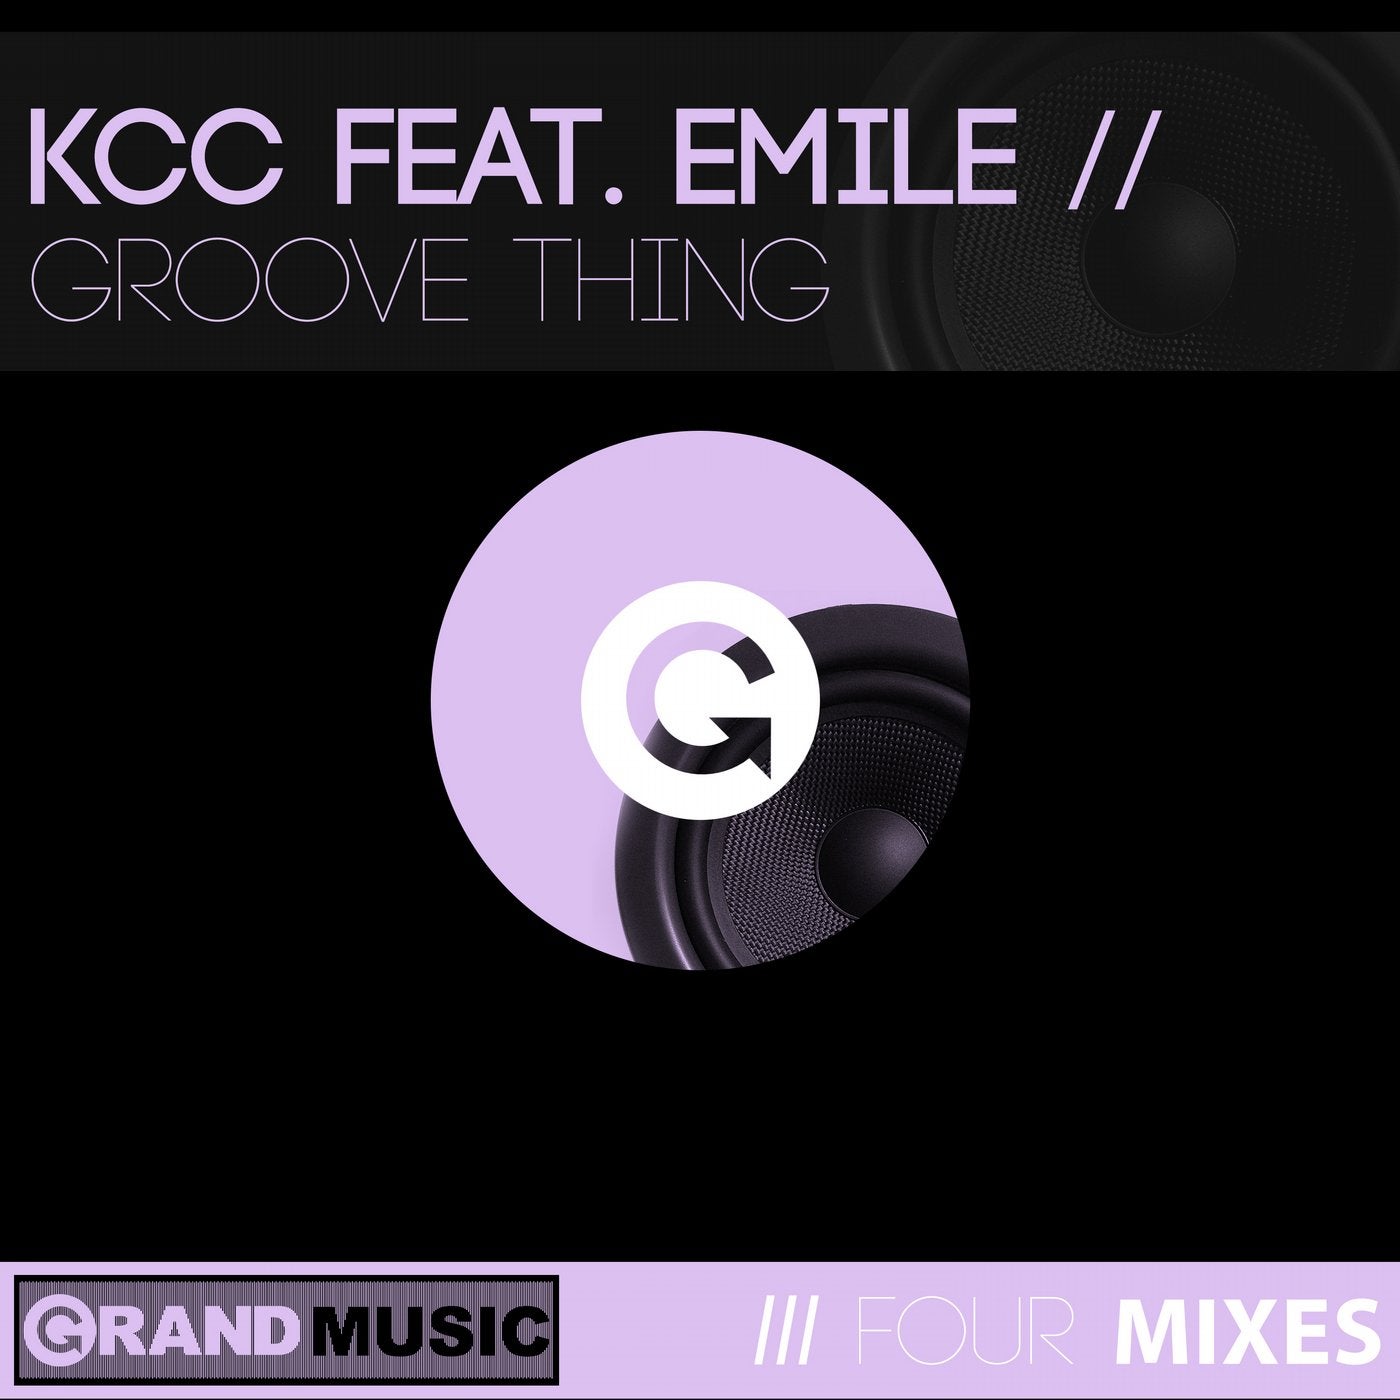 Groove Thing